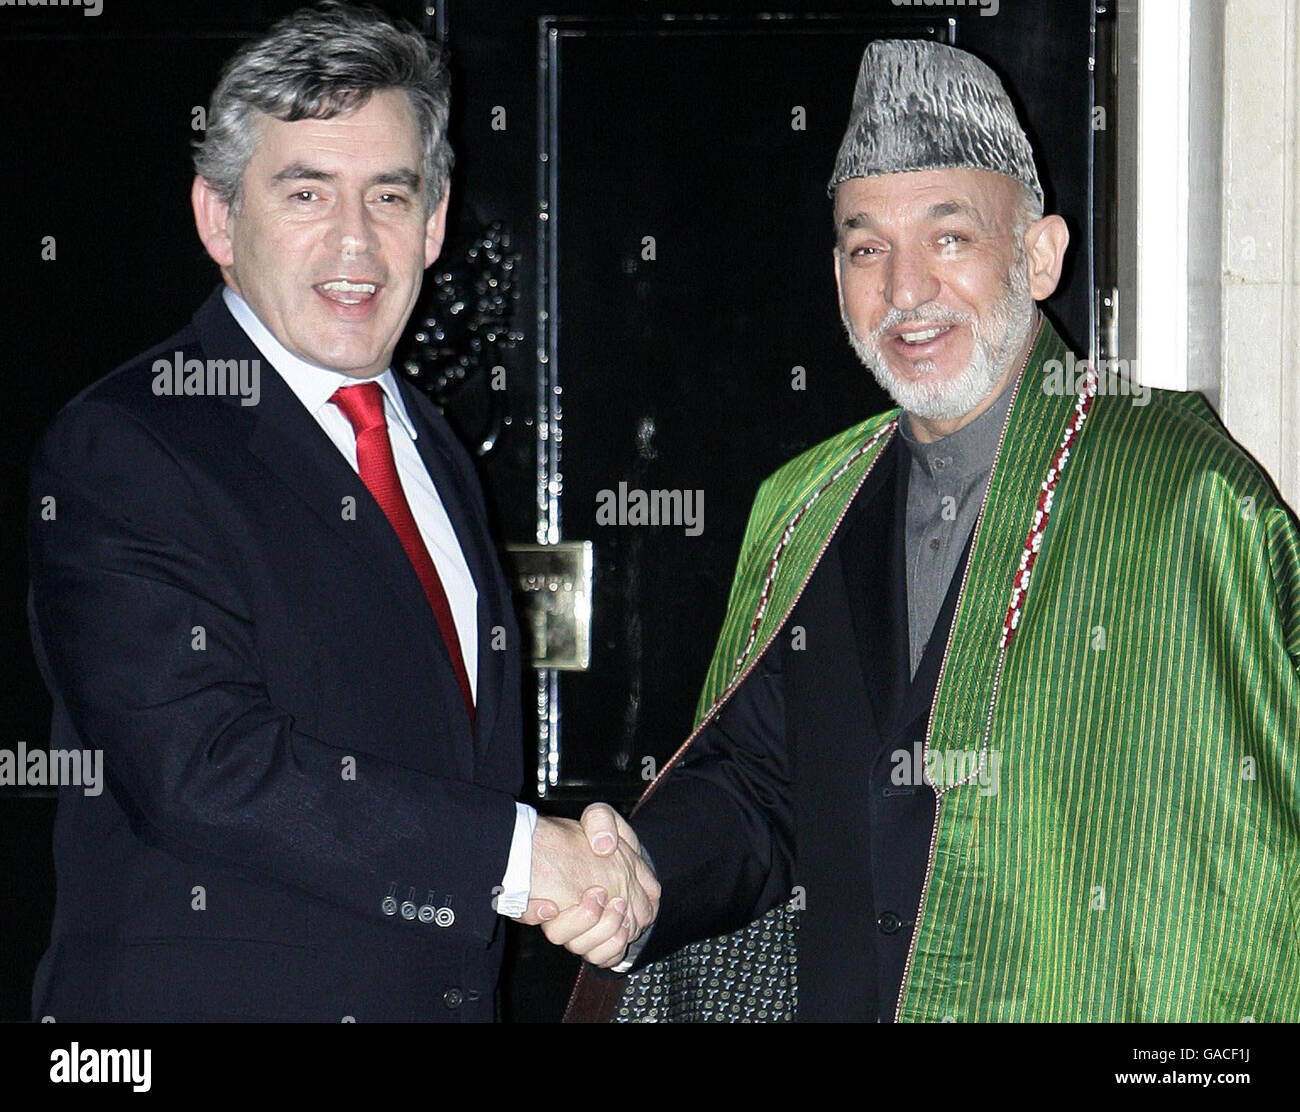 Prime Minister Gordon Brown greets Afghan President Hamid Karzai on the steps of 10 Downing Street, London. Stock Photo